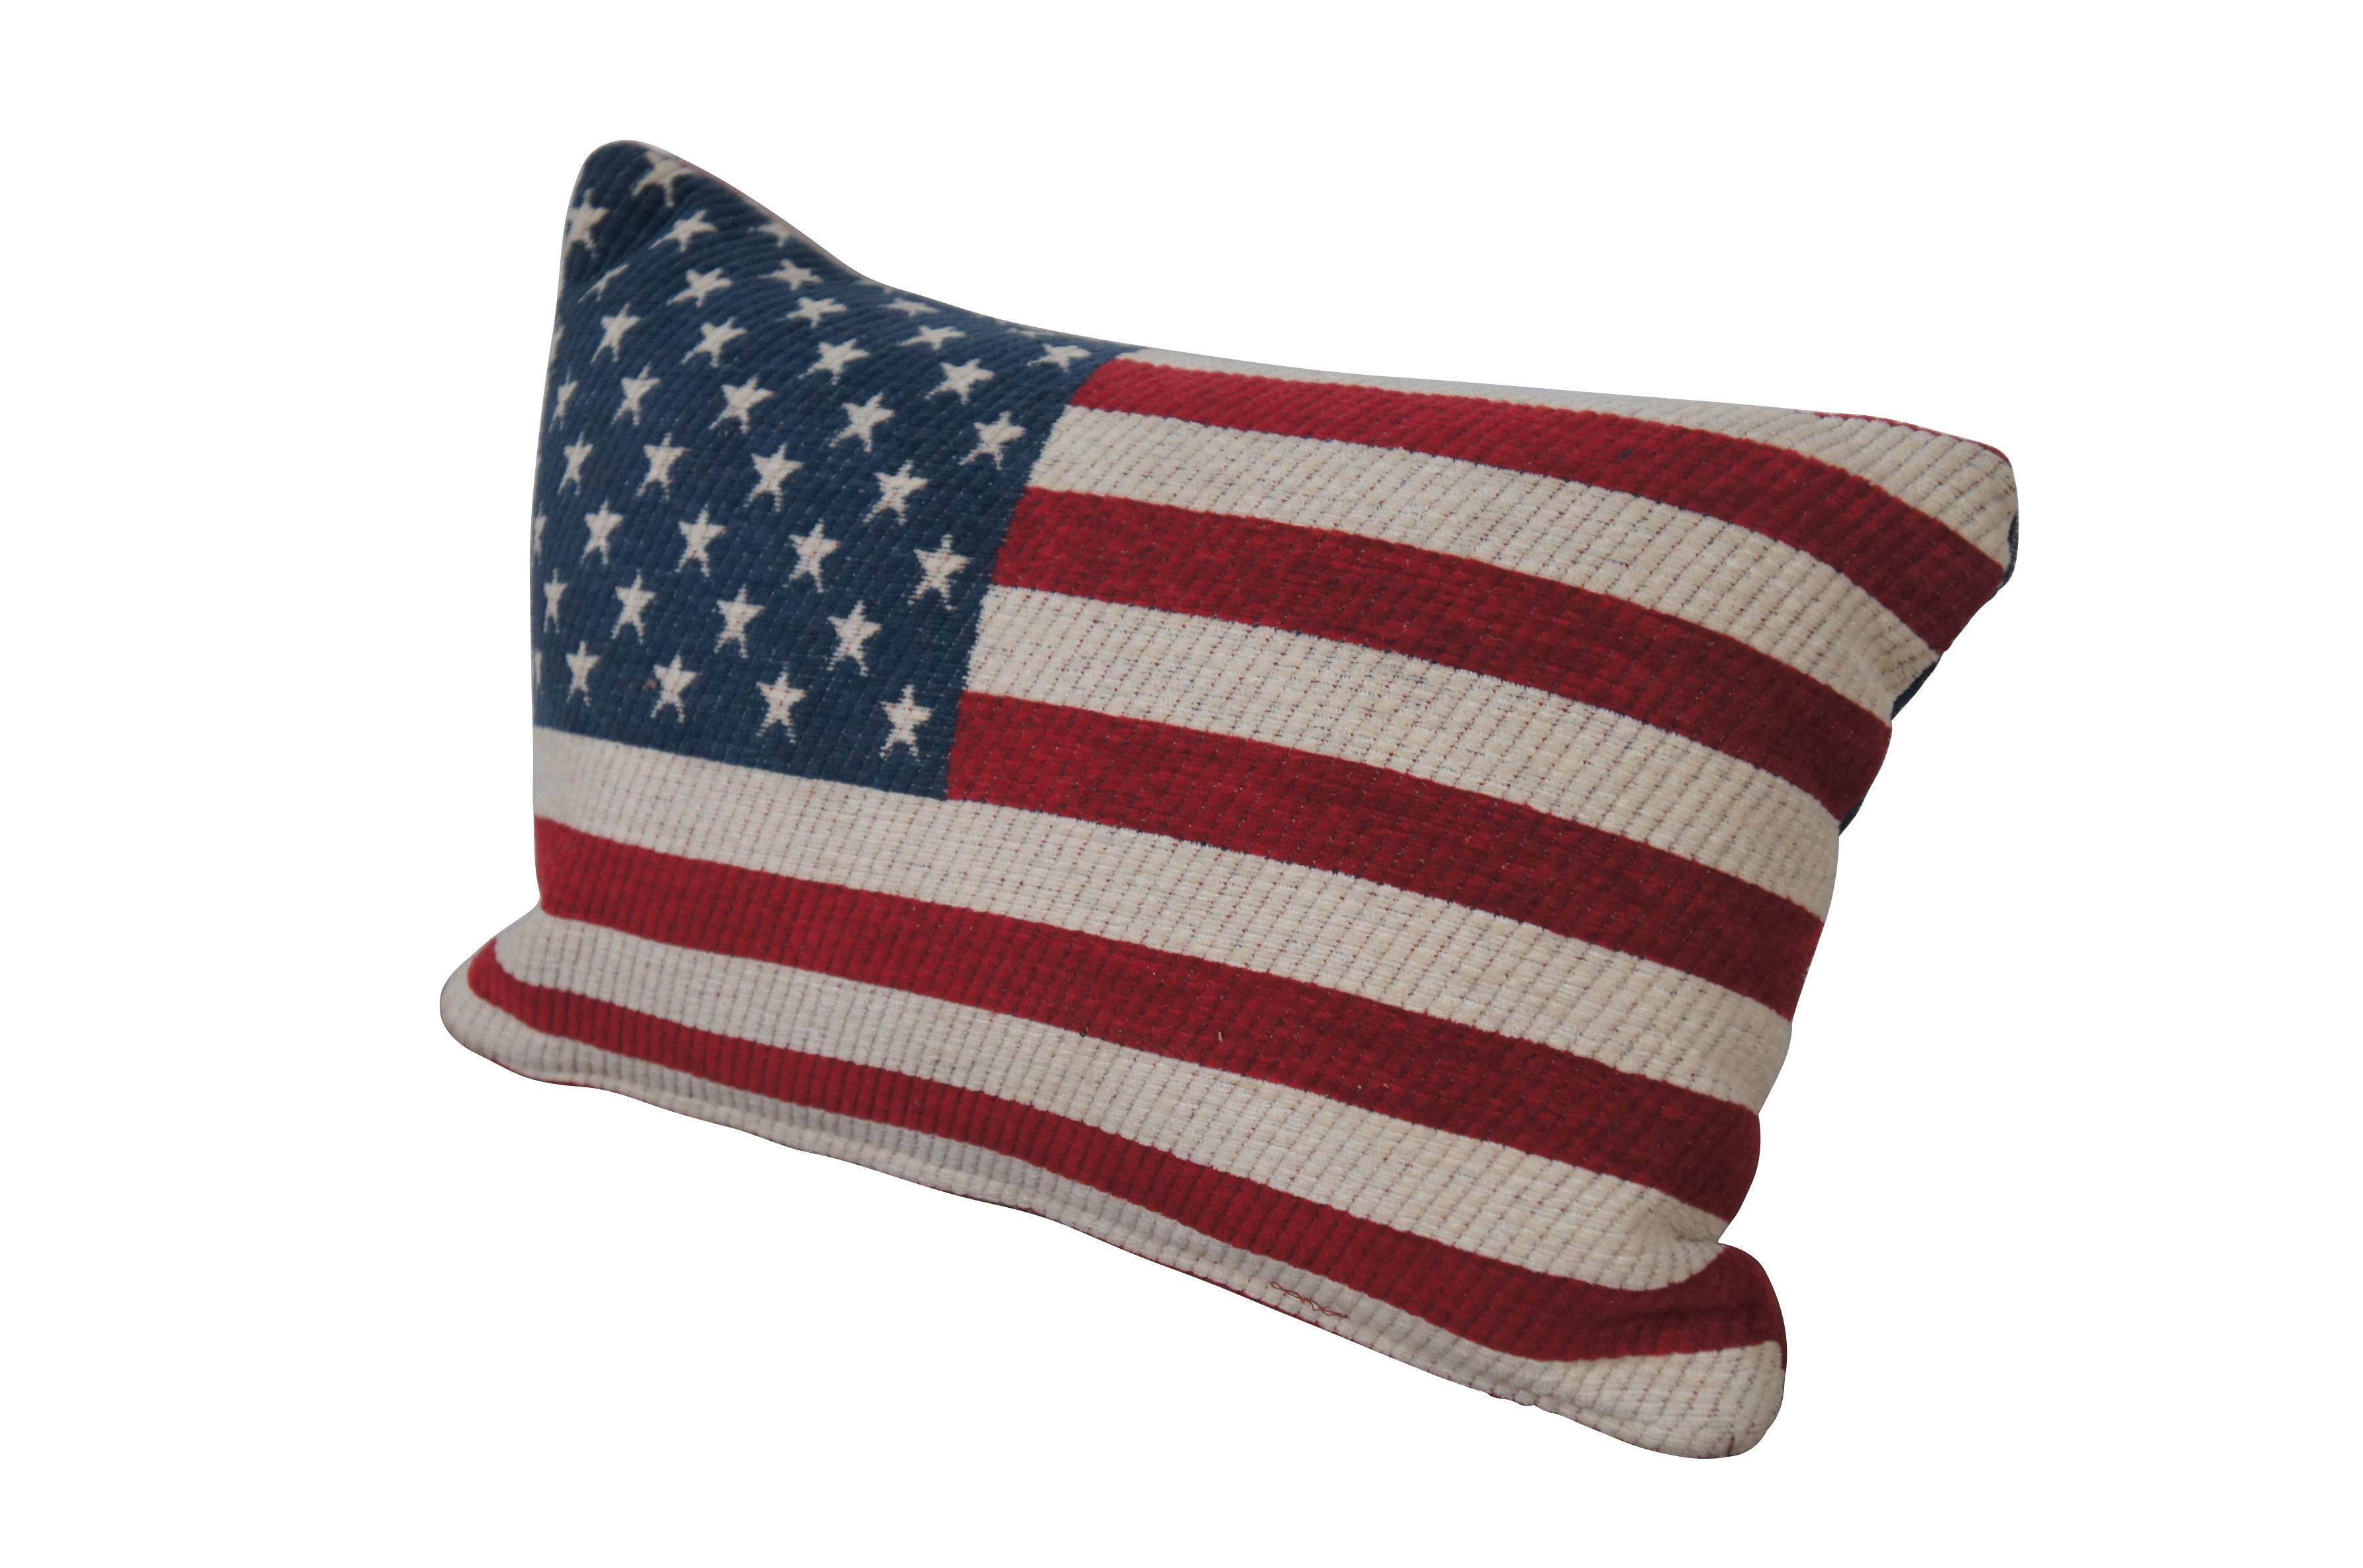 20th century rectangular lumbar / throw pillow in thick ribbed corduroy, printed with the pattern of the American flag. Zipper closure. Fiber filled.

Dimensions:
10